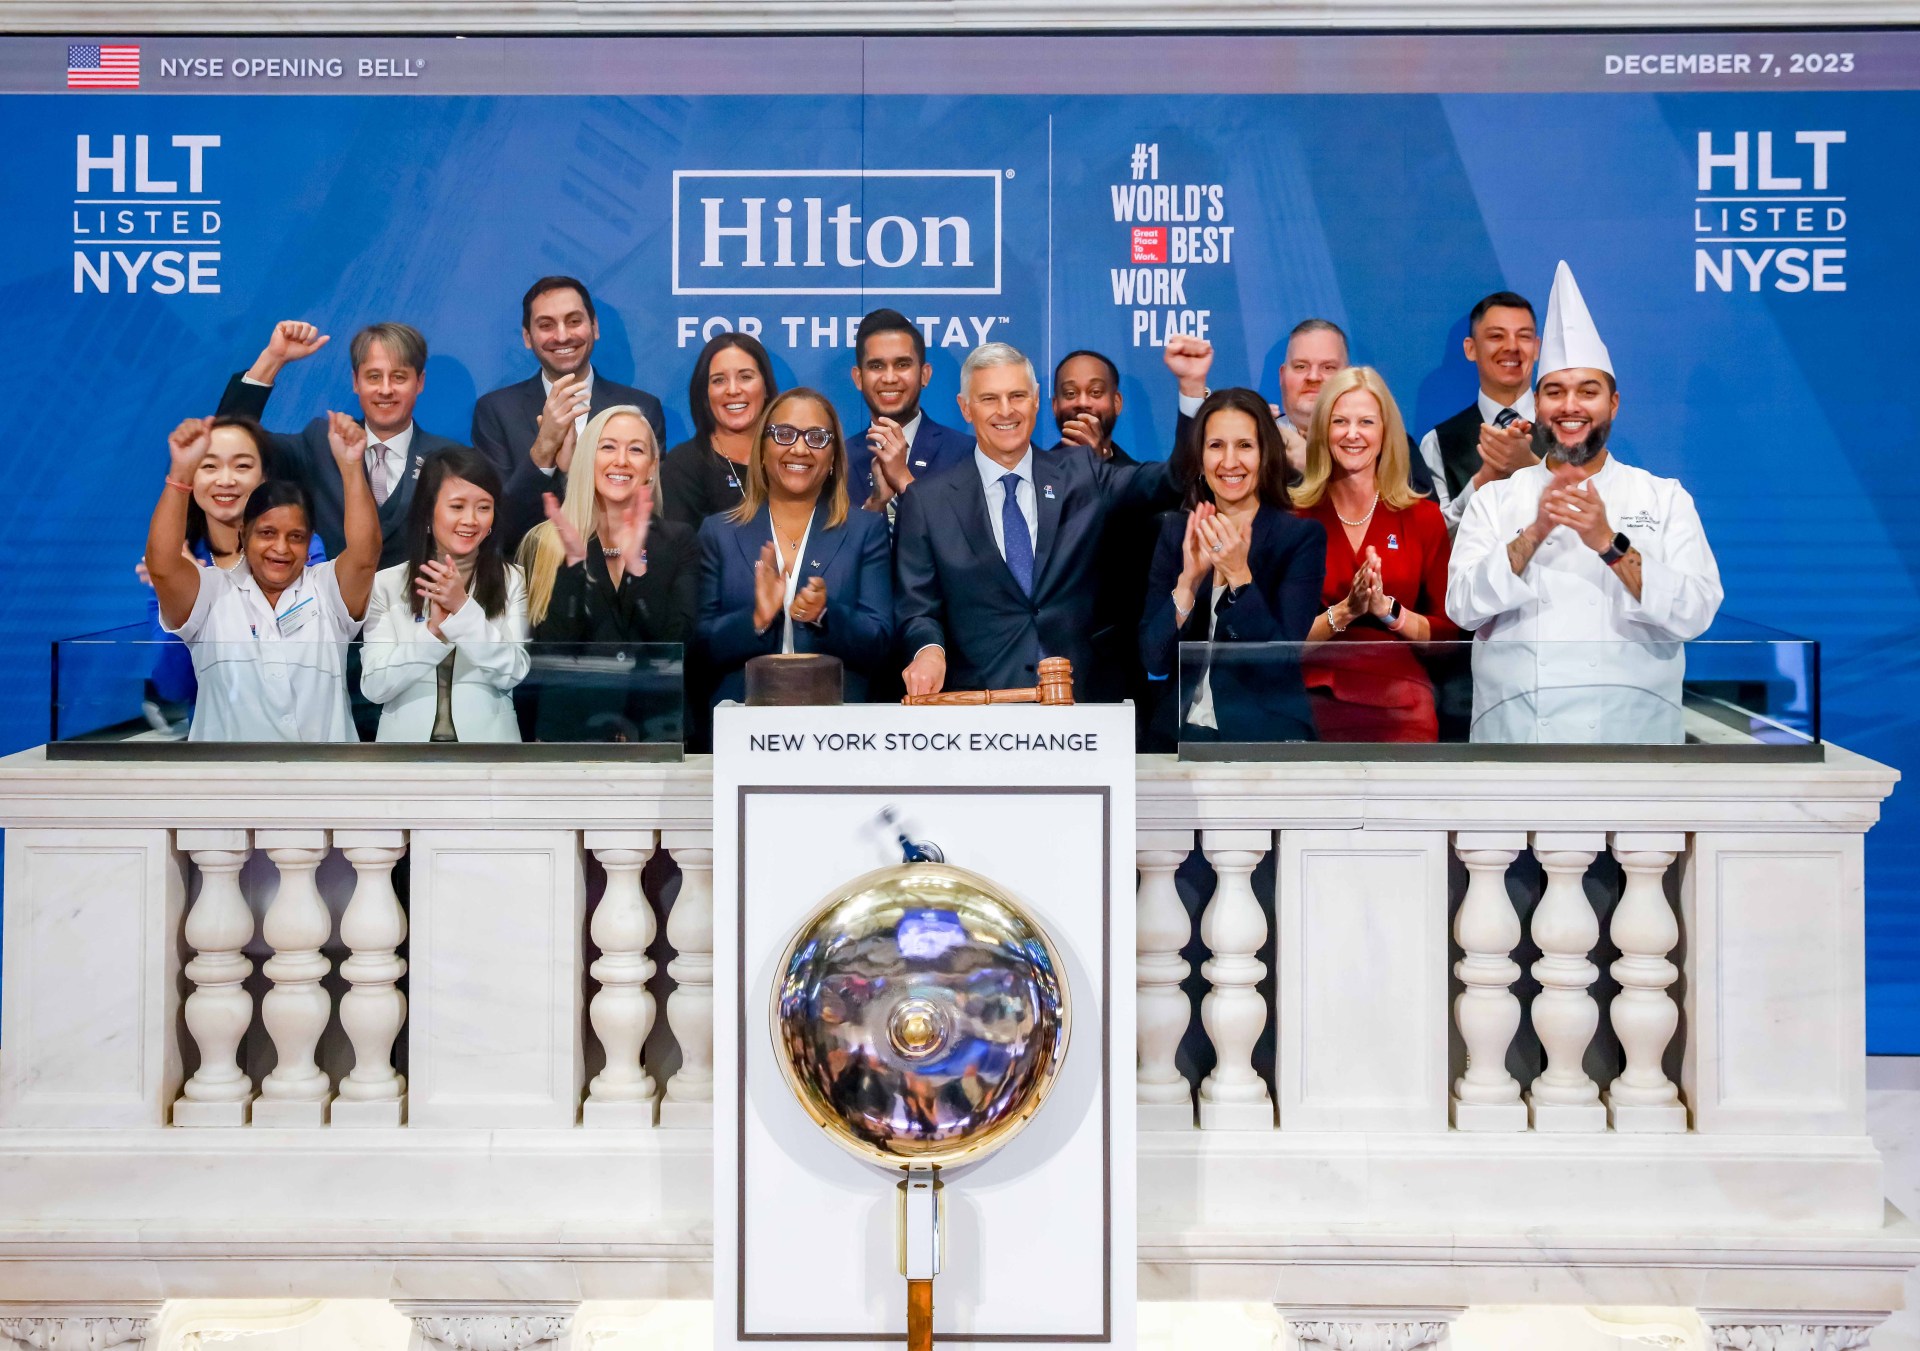 Hilton Worldwide Holdings Inc. (NYSE: HLT) Rings The Opening Bell®  The New York Stock Exchange welcomes Hilton Worldwide Holdings Inc. (NYSE: HLT), today, Thursday, December 7, 2023, in celebration of its 10th anniversary of listing. To honor the occasion, Chris Nassetta, President and Chief Executive Officer, joined by Lynn Martin, NYSE President, rings the Opening Bell®. Photo Credit: NYSE